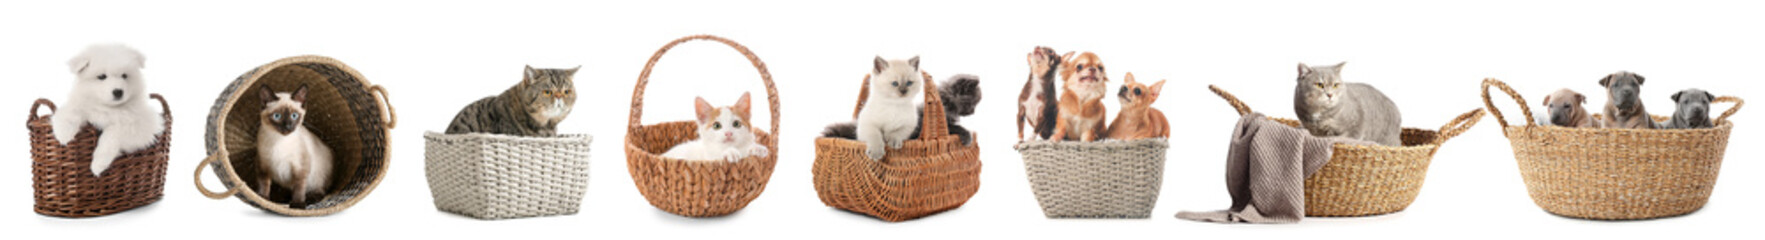 Set of cute domestic animals in wicker baskets isolated on white